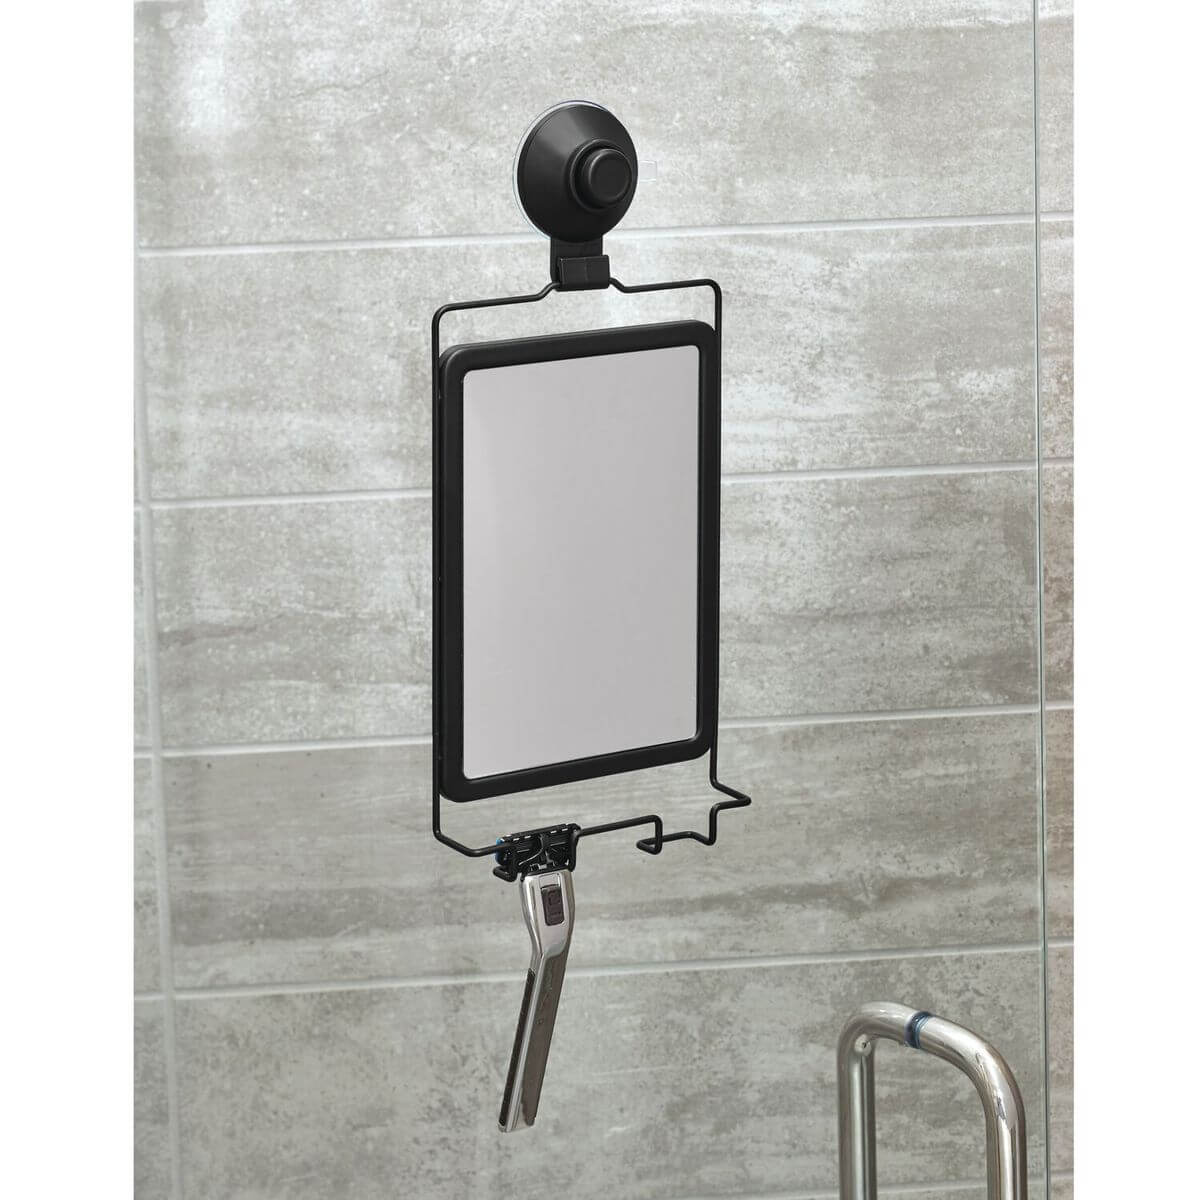 A matte black suction shaving mirror hung on tiles in the shower. There is a razor on the hanging hook.